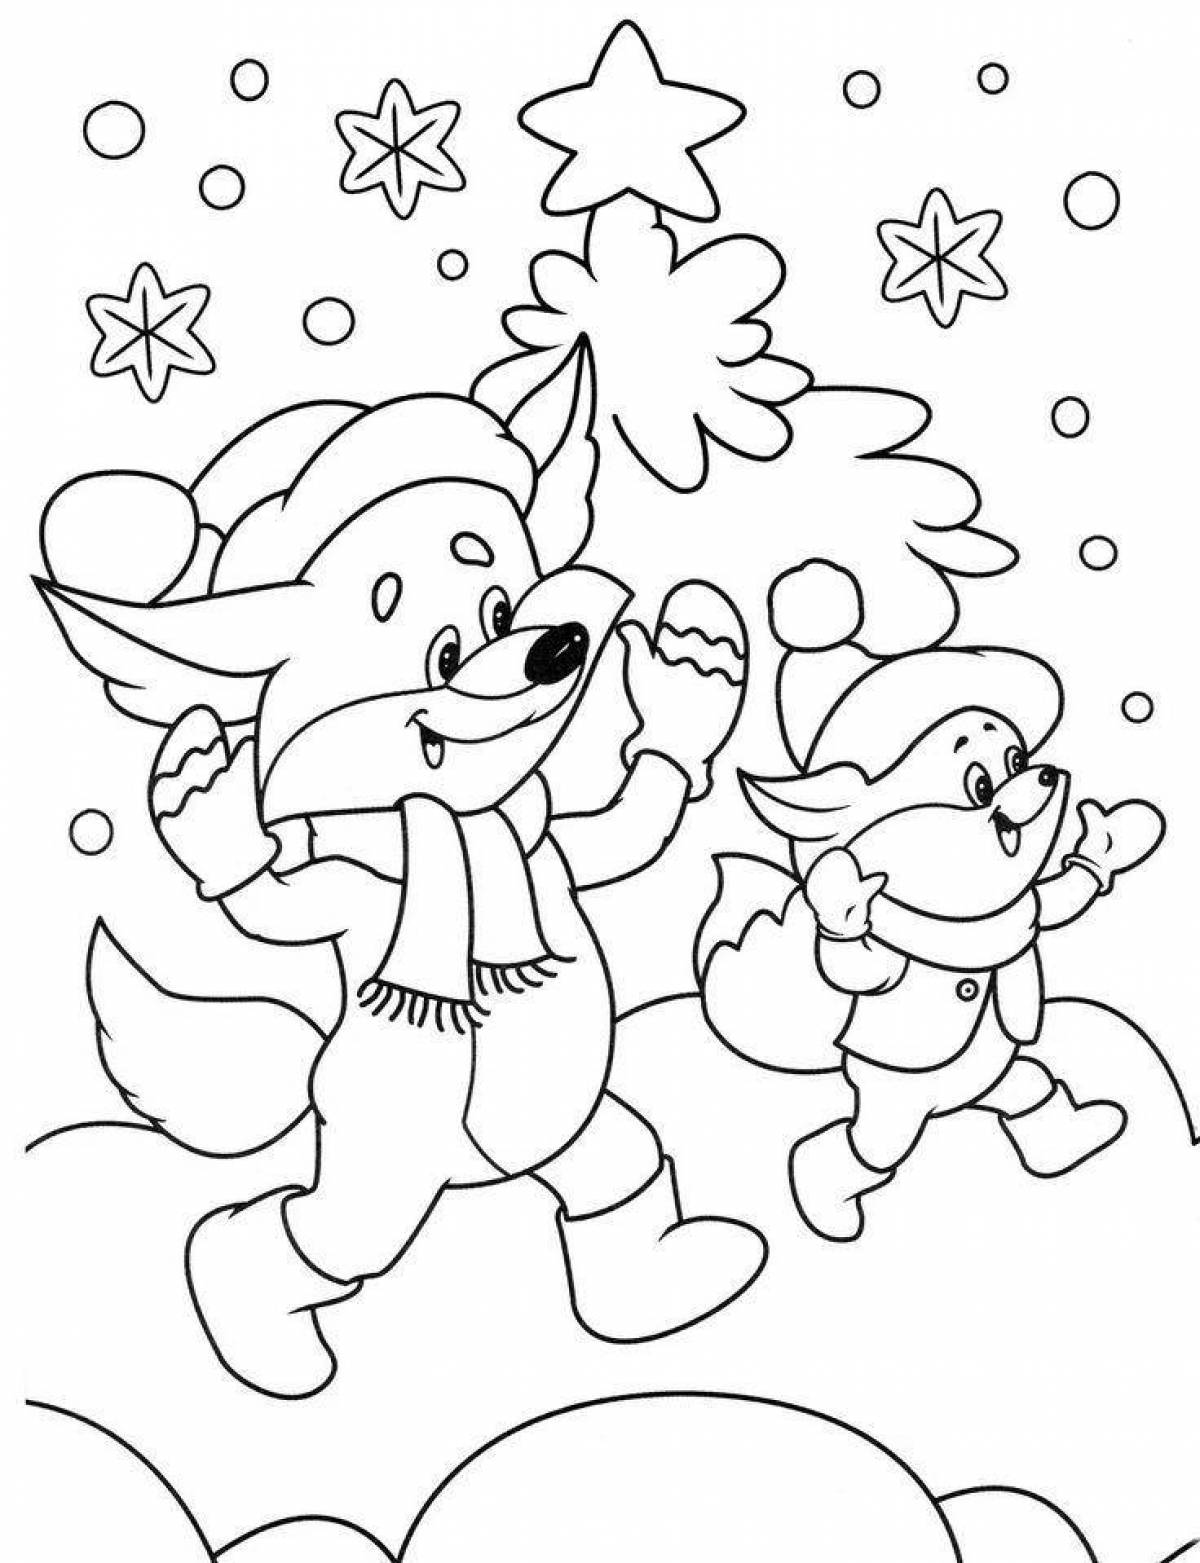 Fancy winter in the forest coloring book